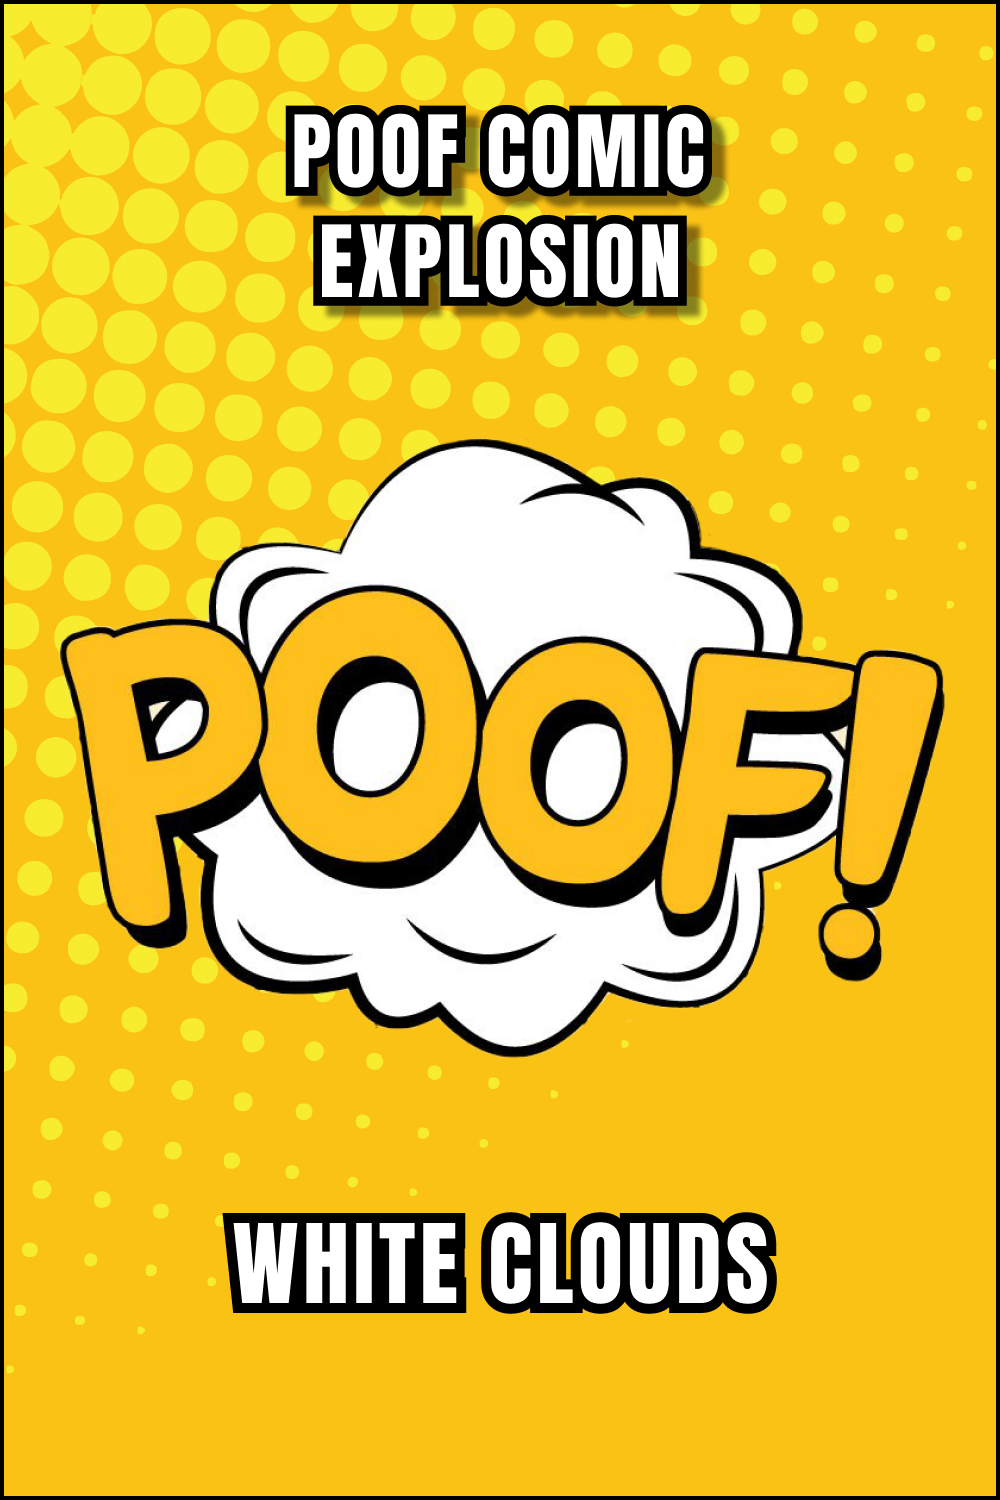 poof comic explosion white clouds pinterest 175